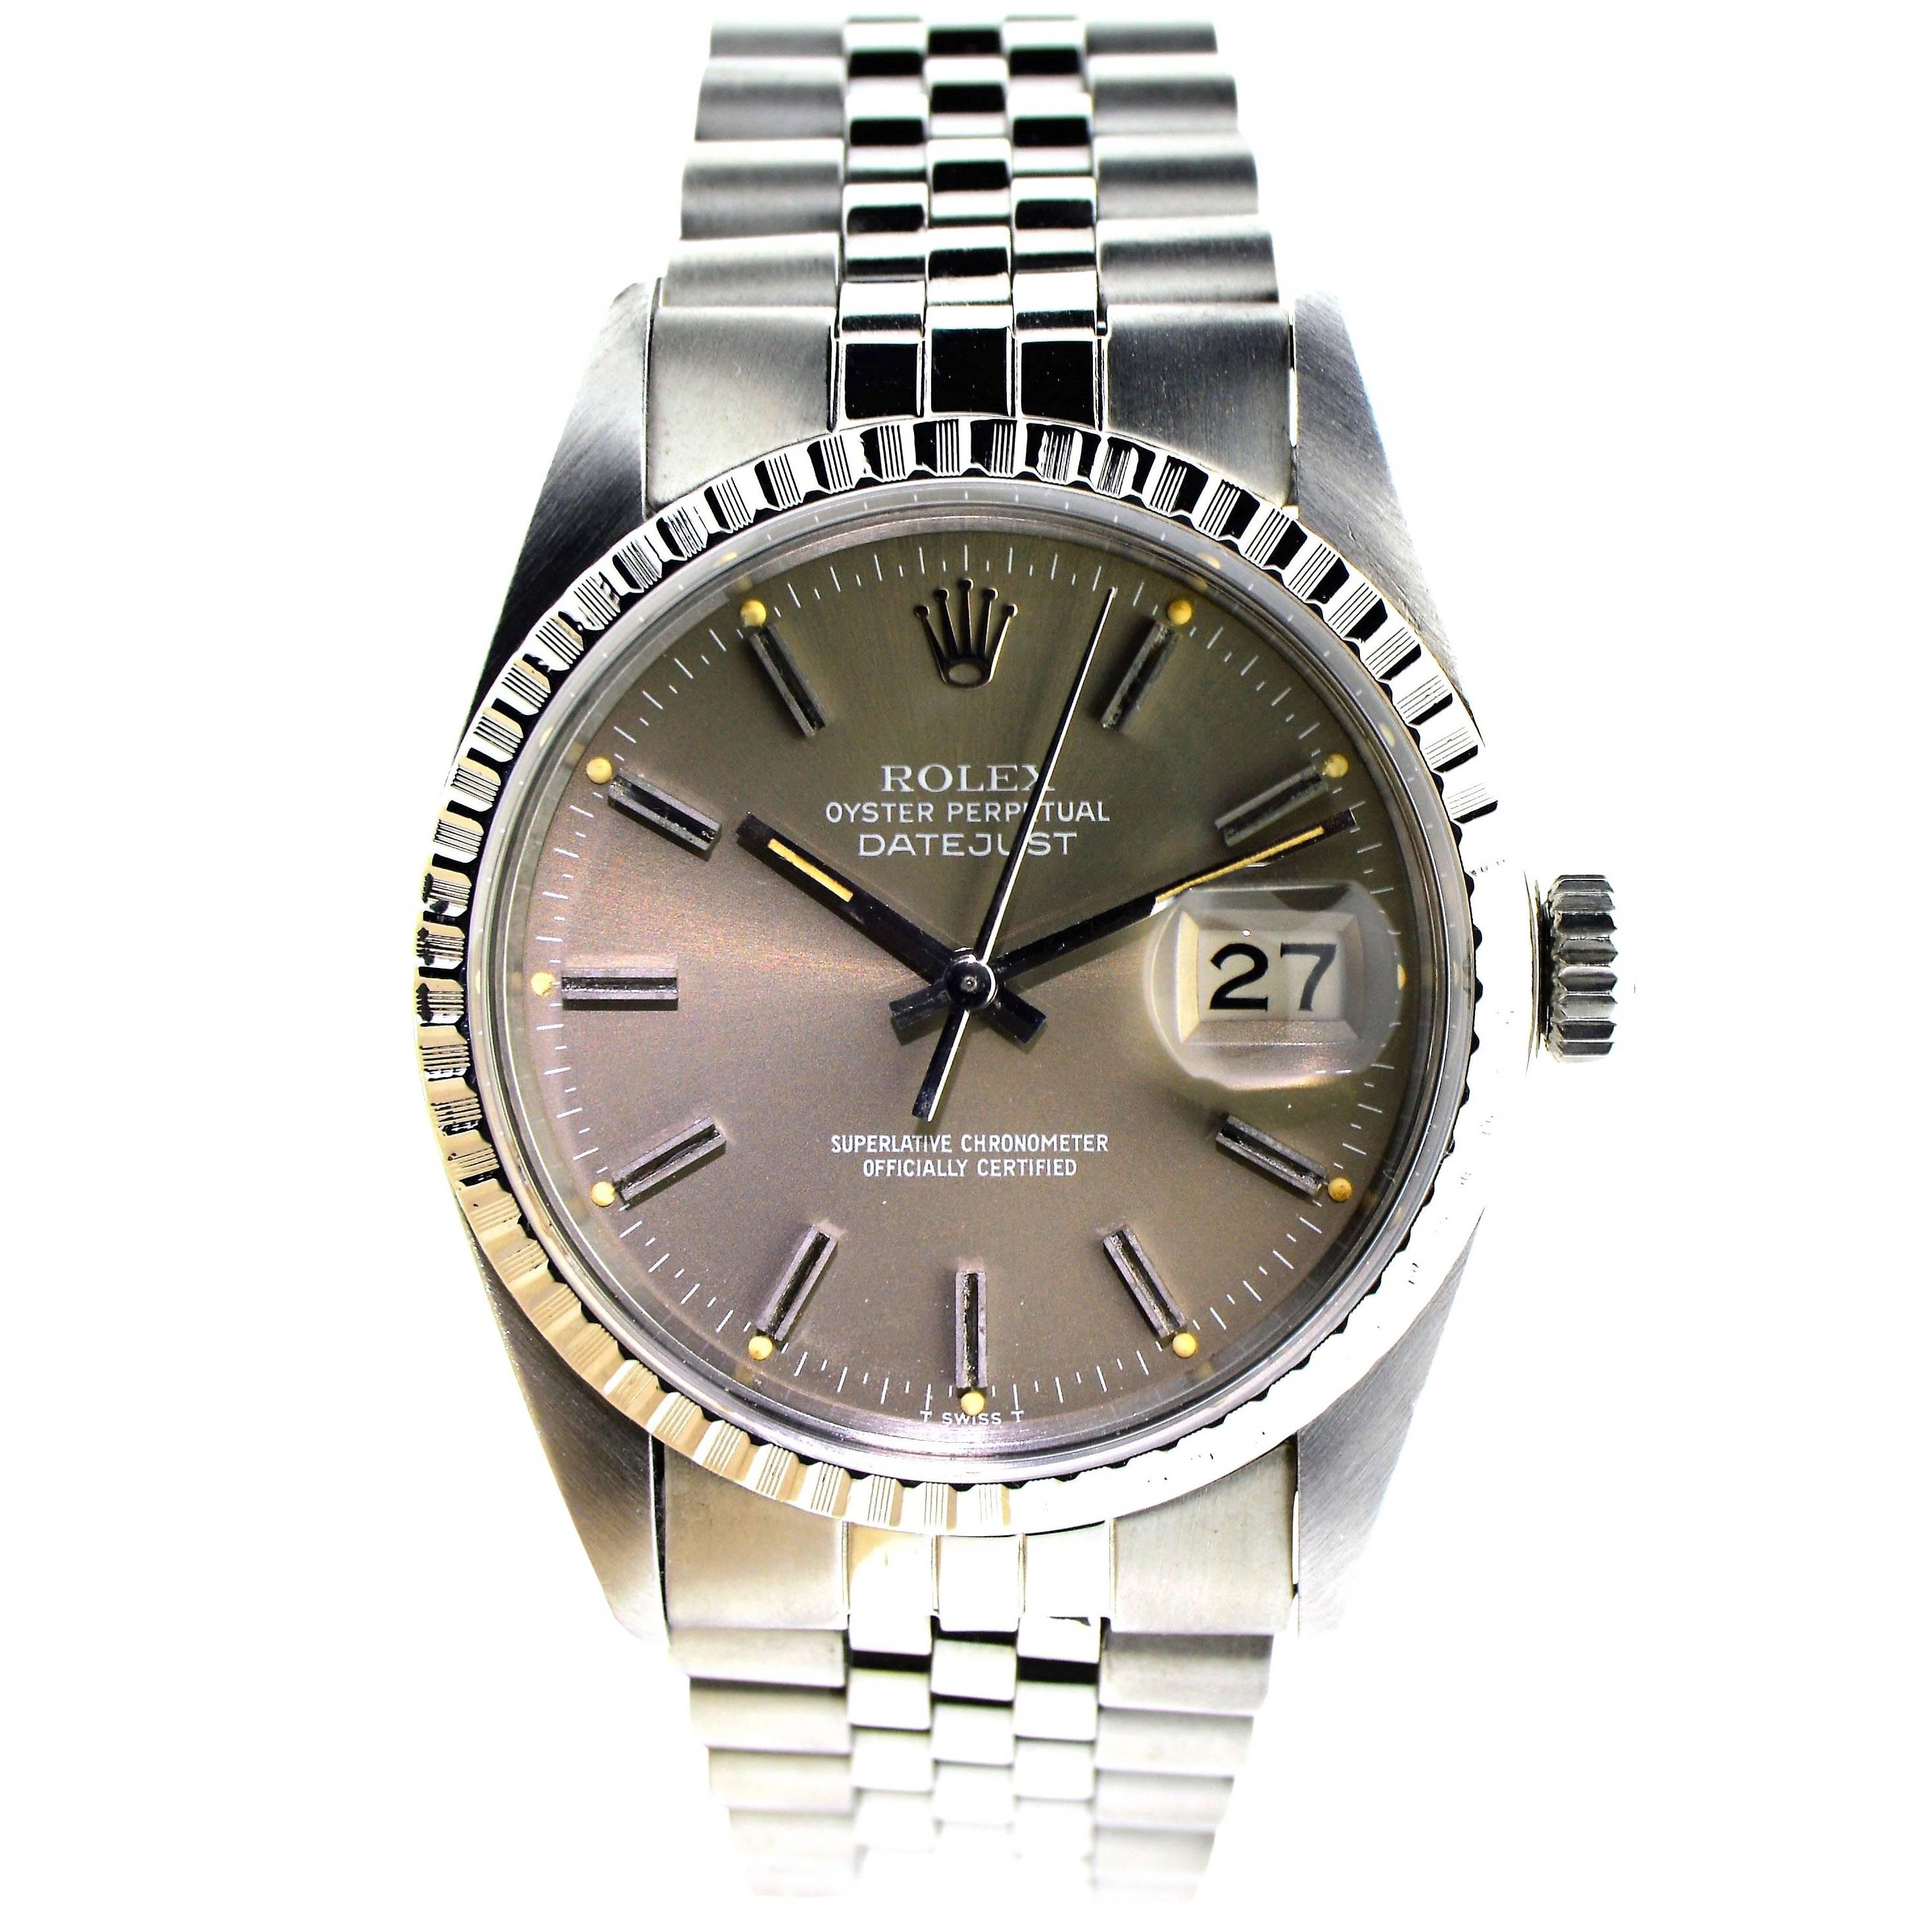 Rolex Stainless Steel Datejust Quickset Perpetual Winding Watch, Late 1970's